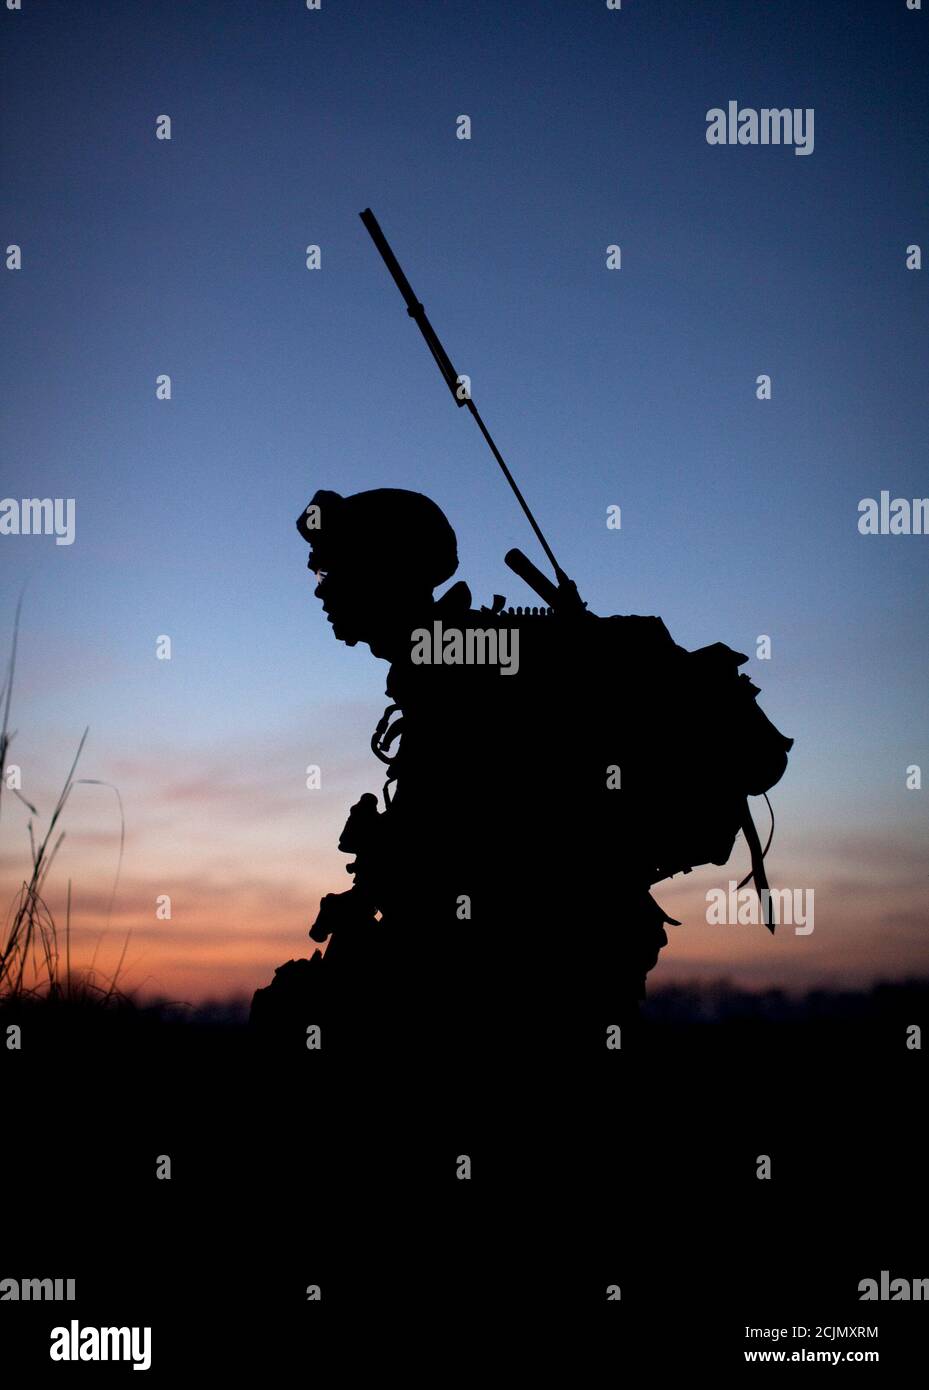 A U.S. Marine, attached to the 2nd Battalion 2nd Marines from Camp Lejeune, North Carolina, is silhouetted at dusk during an operation in Garmsir district of Helmand Province December 20, 2009.   REUTERS/Adrees Latif   (AFGHANISTAN - Tags: CONFLICT MILITARY) Stock Photo